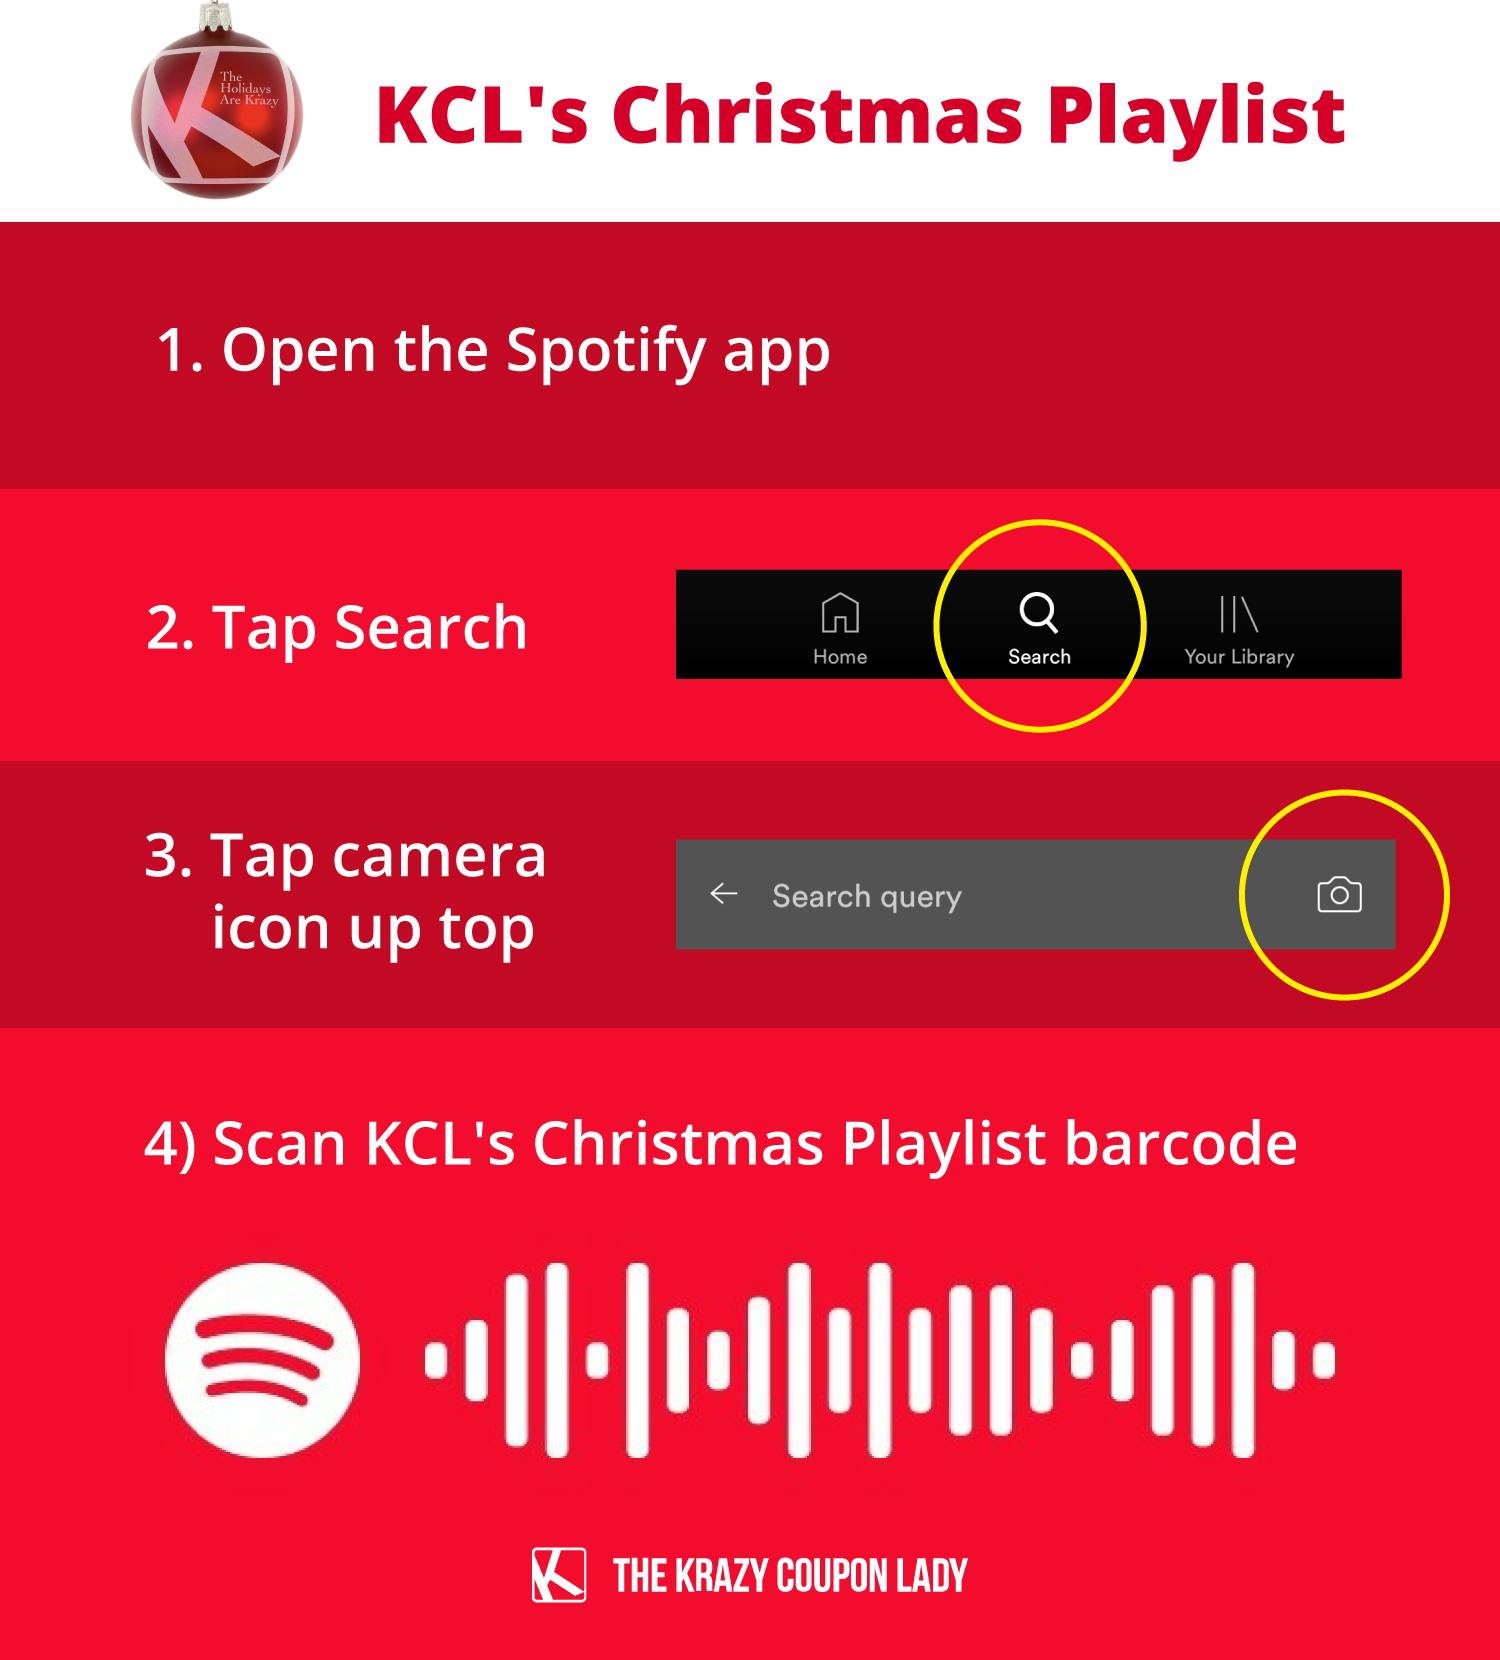 A graphic showing how to add KCL's Christmas Playlist on Spotify